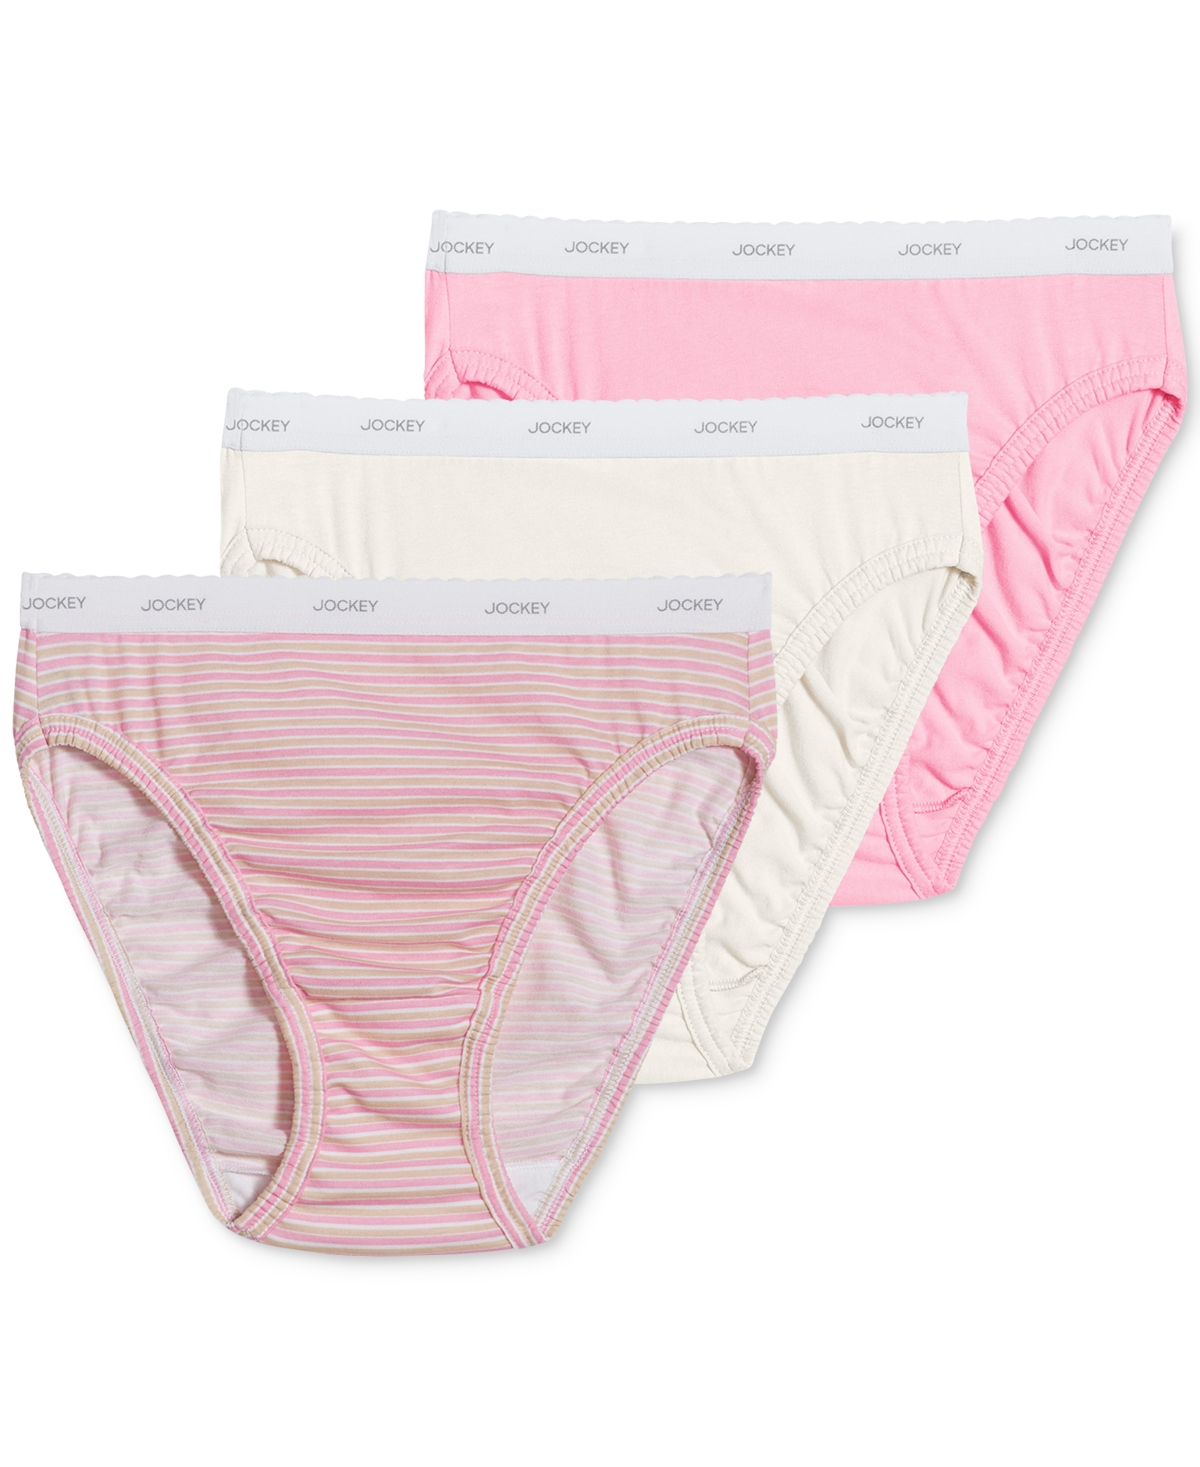 Jockey Classics French Cut Underwear 3 Pack 9480 9481 Extended Sizes In Nude Pink Assorted